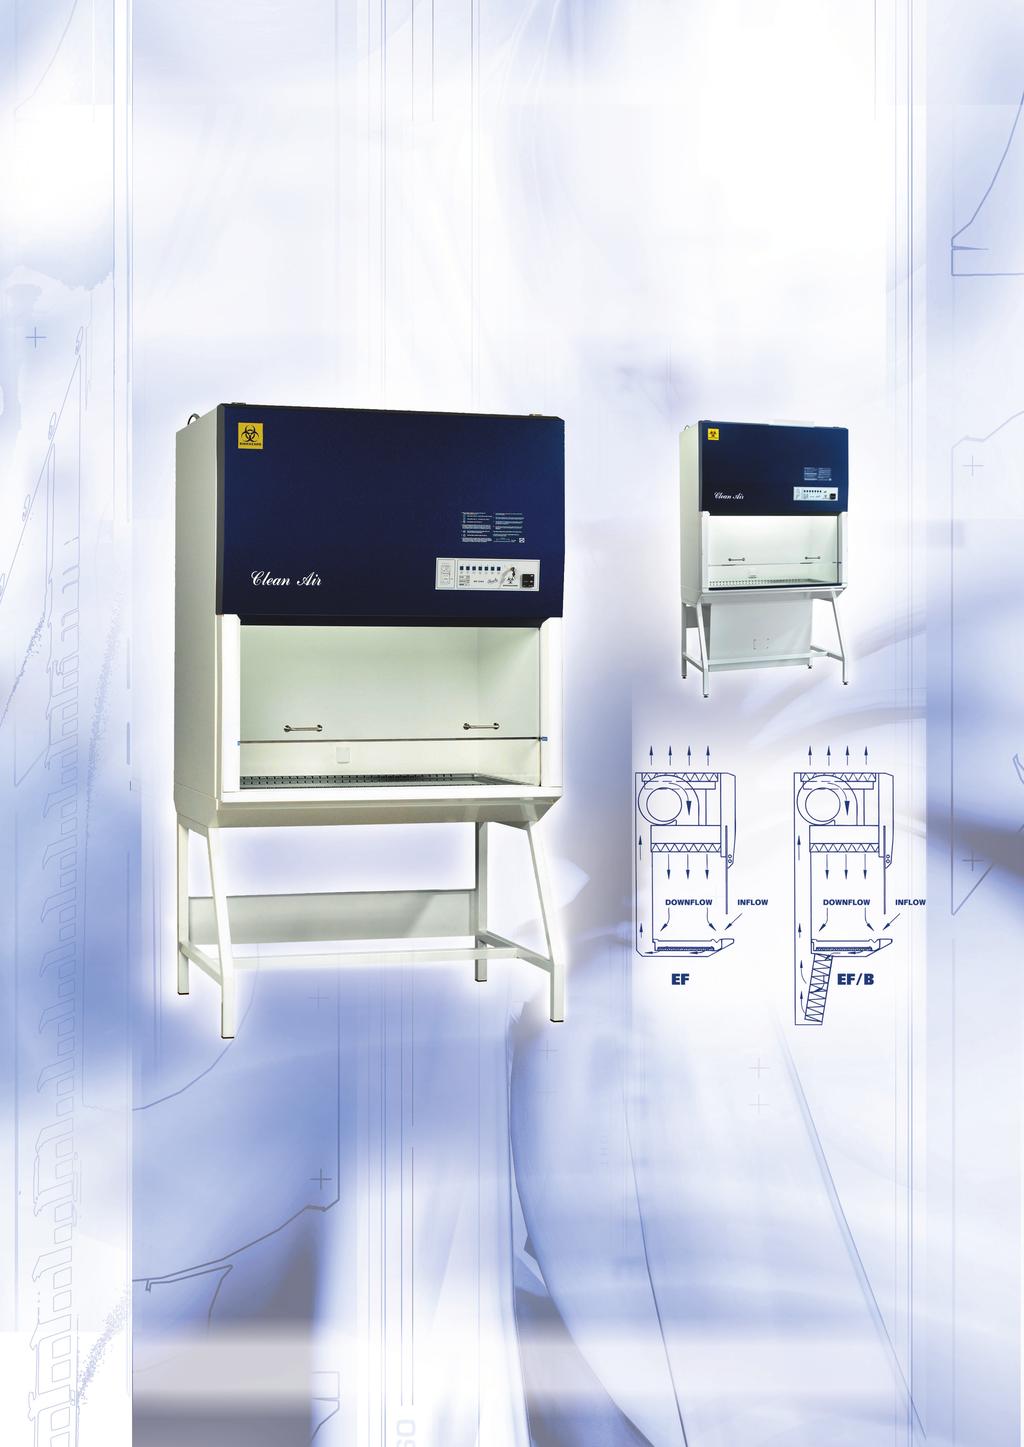 Series EuroFlow Biological Safety Cabinets Clean Air provides a complete range Biological Safety Cabinets offering the highest personnel and/or product and.